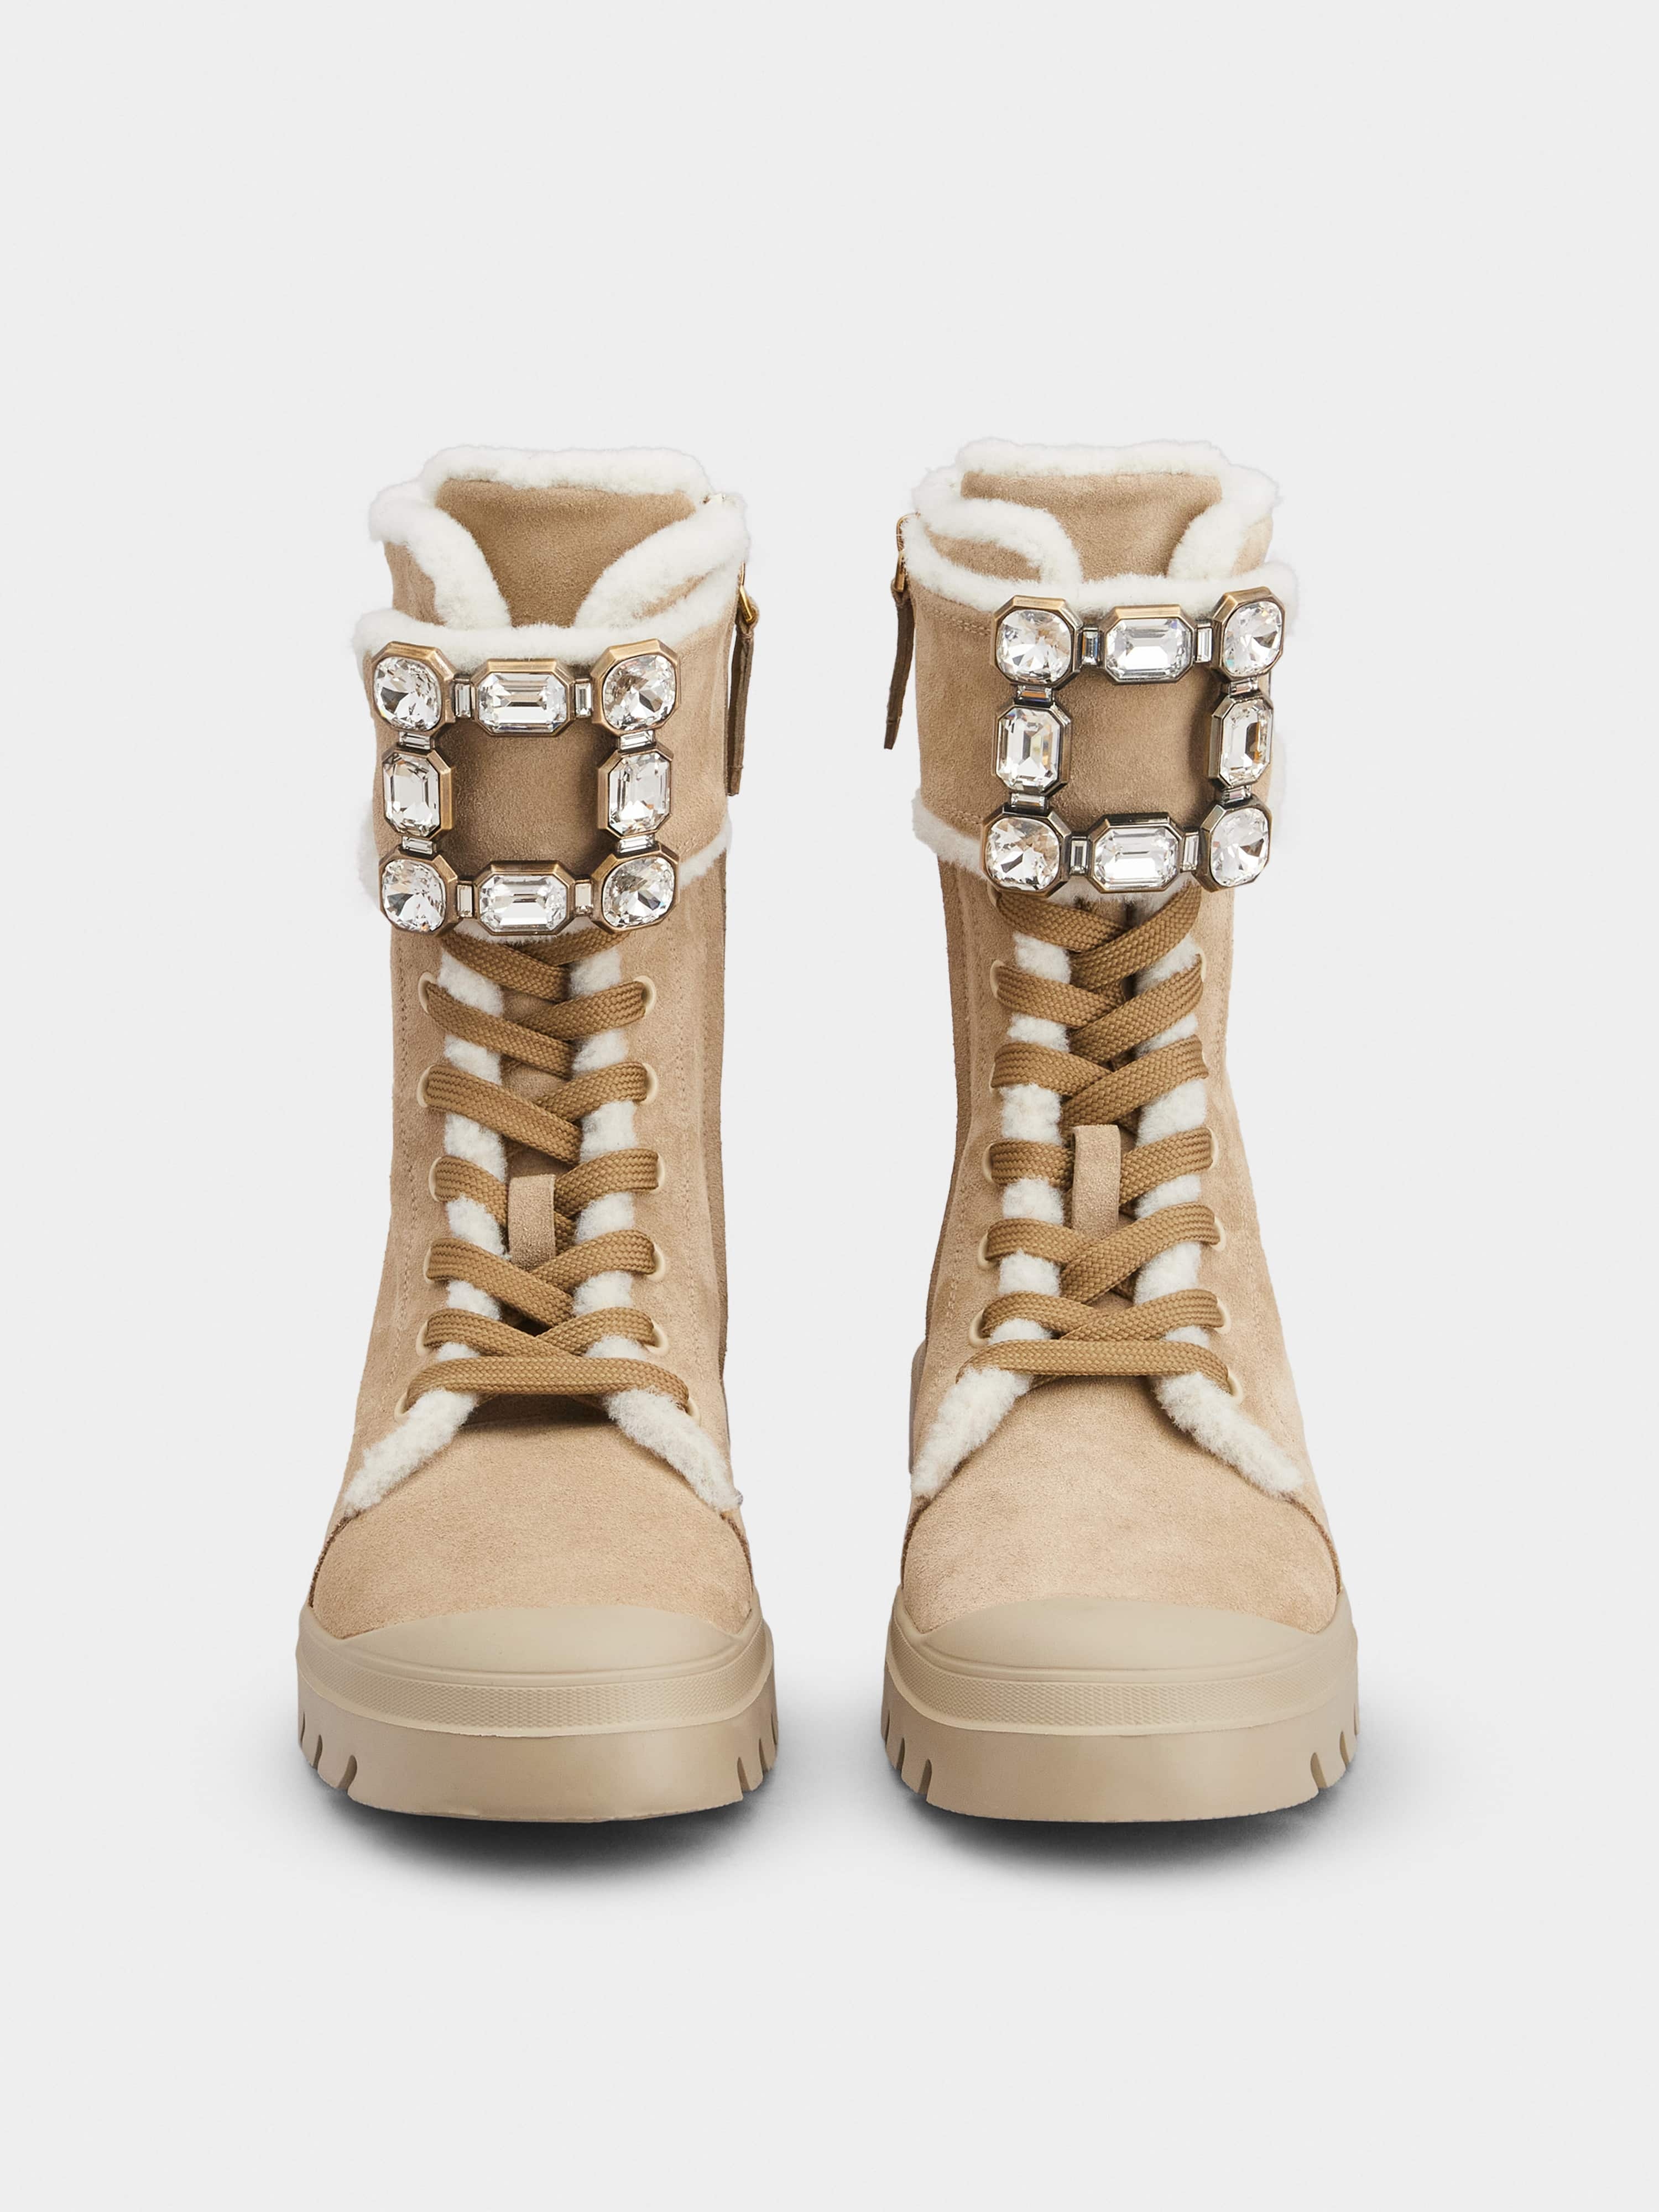 Walky Viv' Lace Up Shearling Strass Buckle Booties in Suede - 7